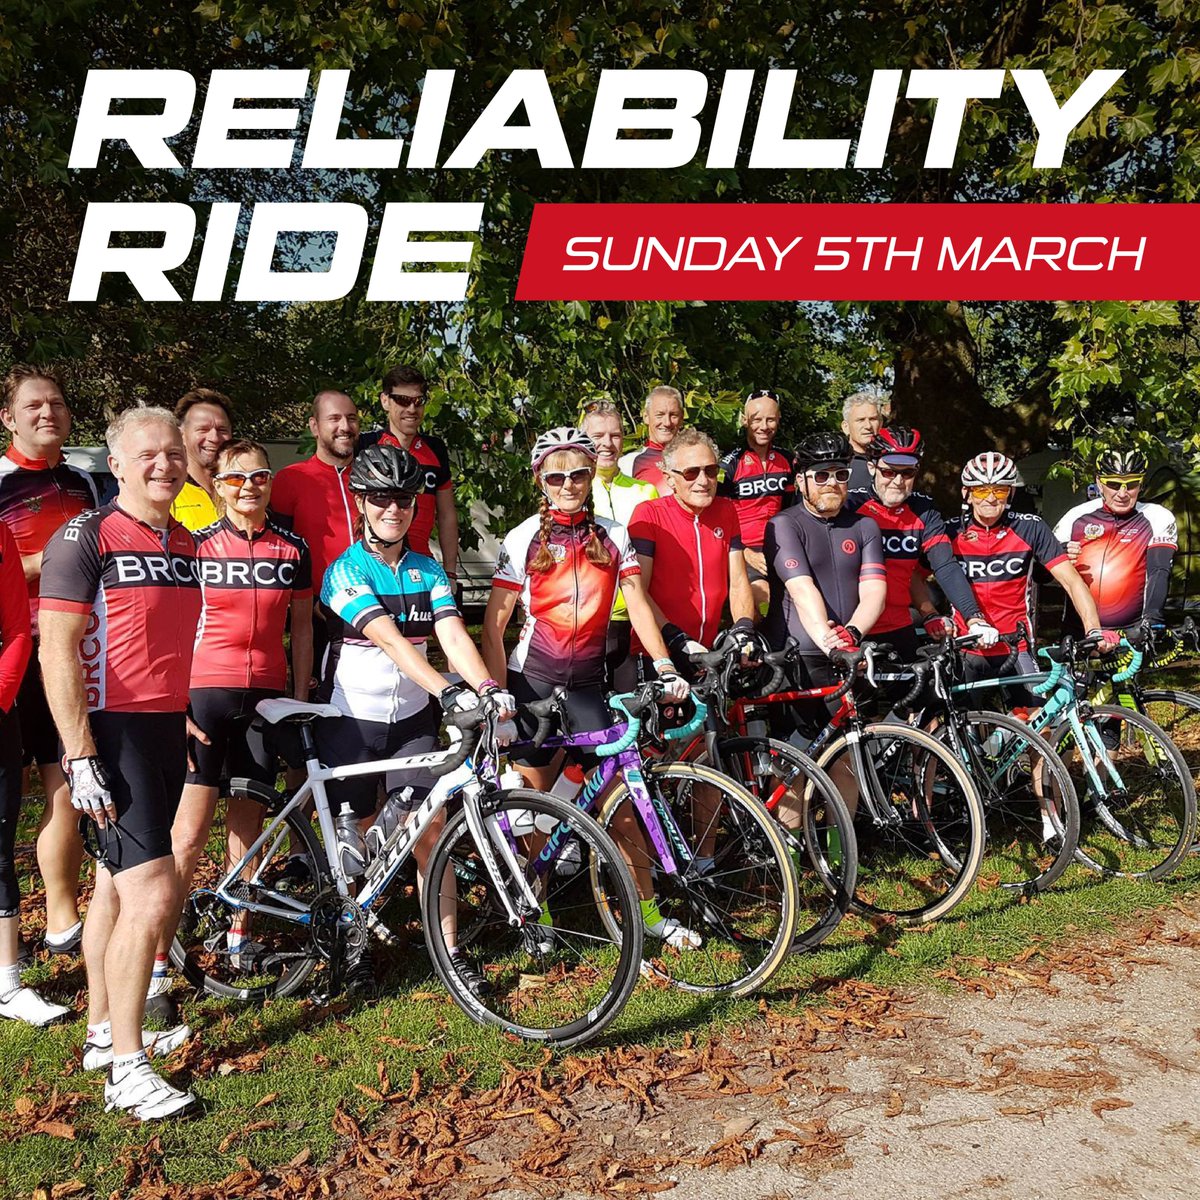 BedsRoadCC Reliability Ride - Sun 5th March - All Welcome 🙂 Visit our Facebook page for full details:facebook.com/BedsRoadCC/